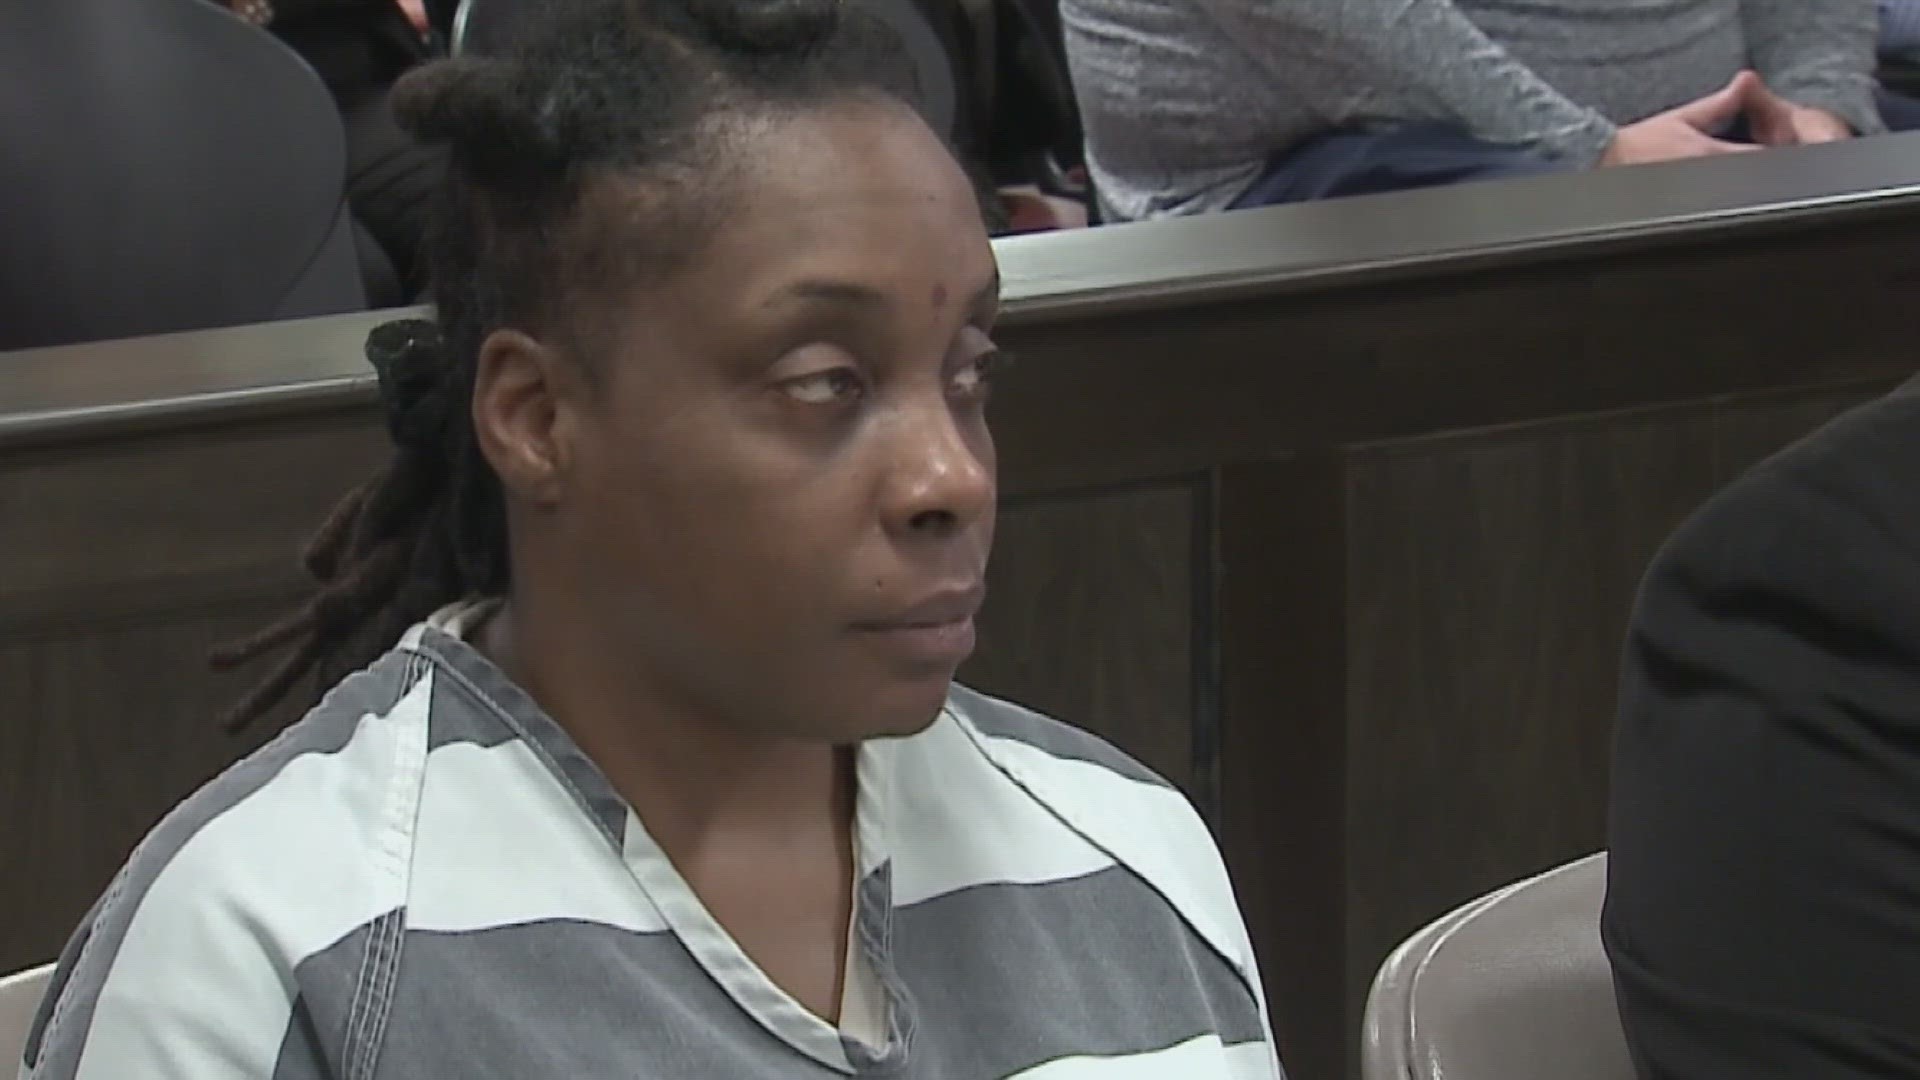 Dawn Coleman entered a guilty plea and will be sentenced Nov. 21, under the plea deal.